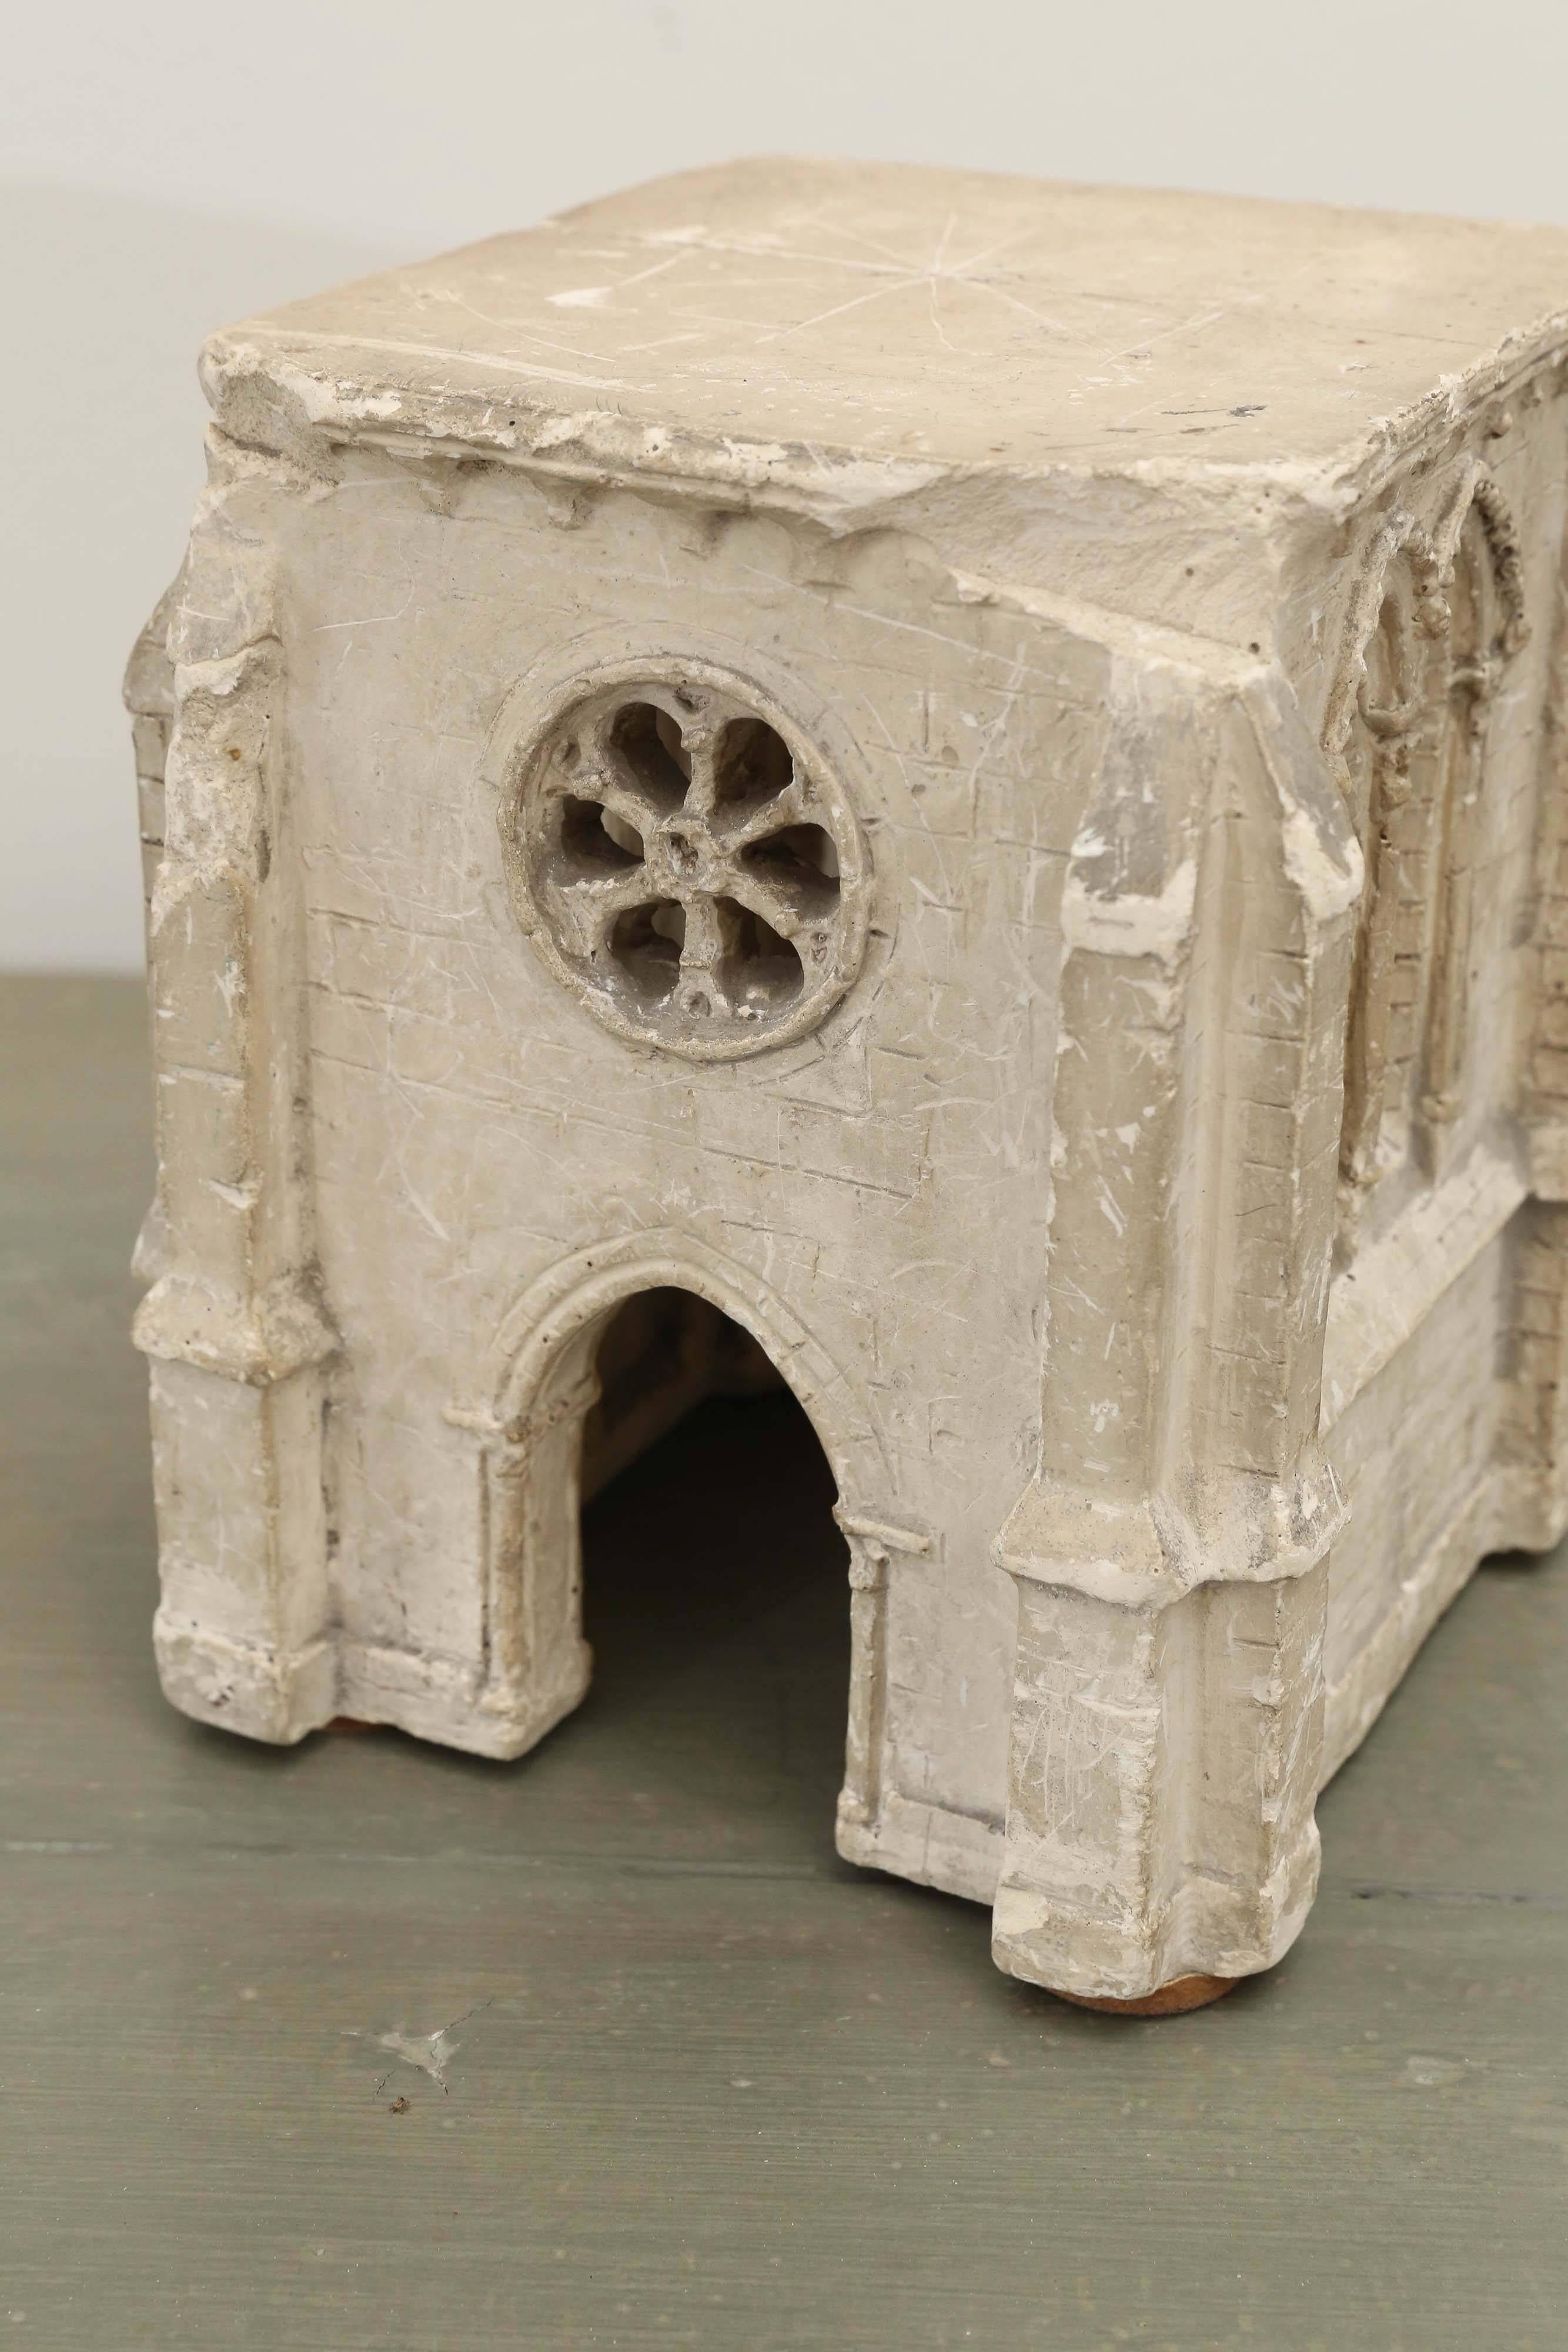 18th century architect's plaster model of a baroque church with the arched windows and the rose window above the main entrance.